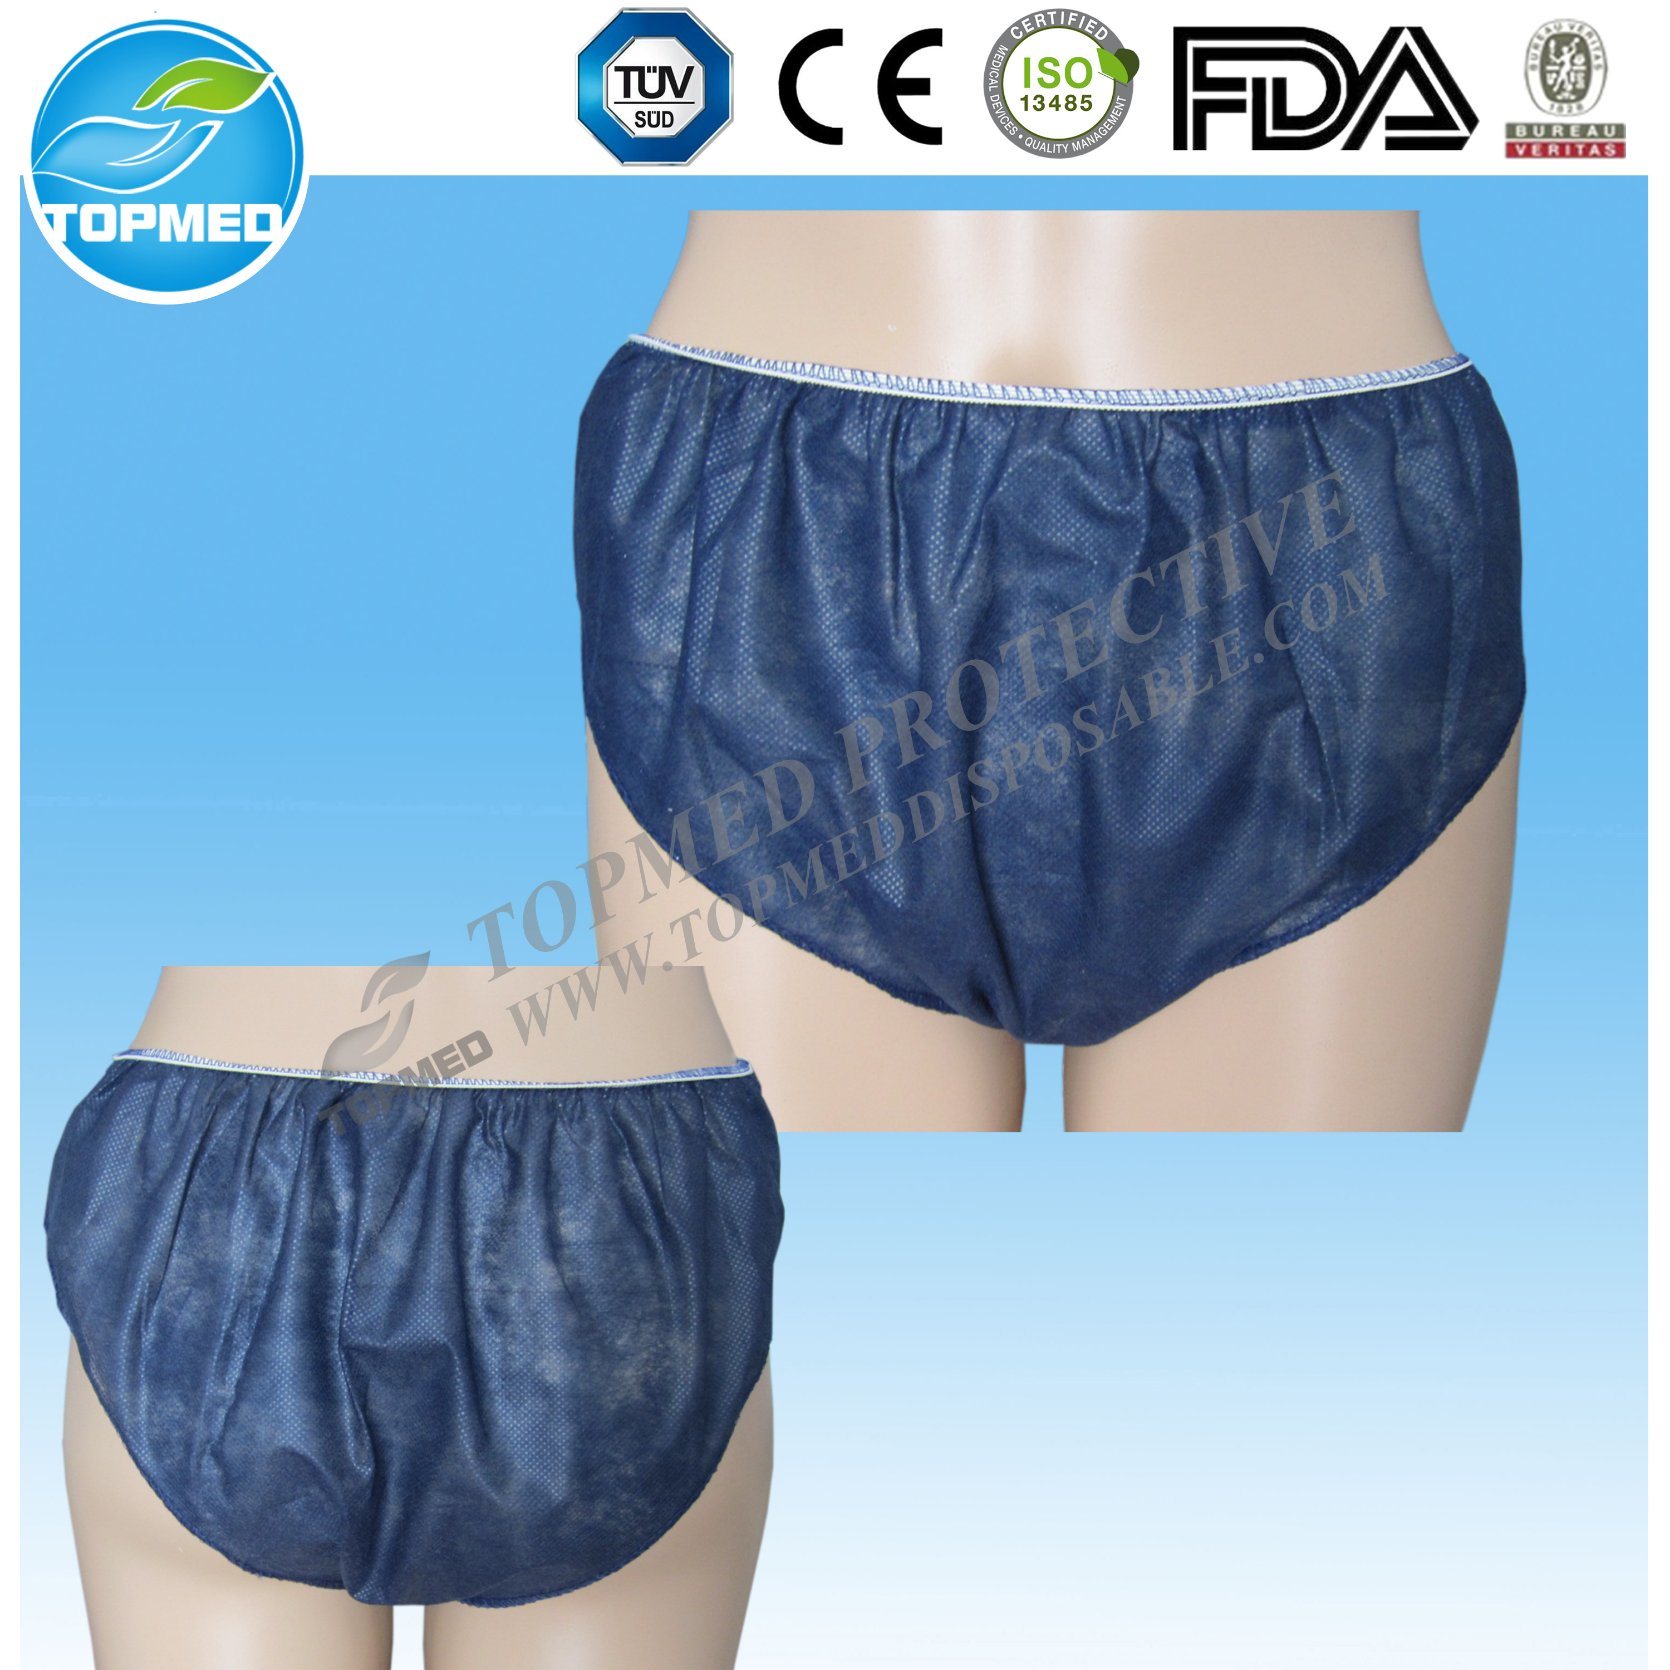 Disposable Clean Womens Underwear for Travelling, Hotel Use